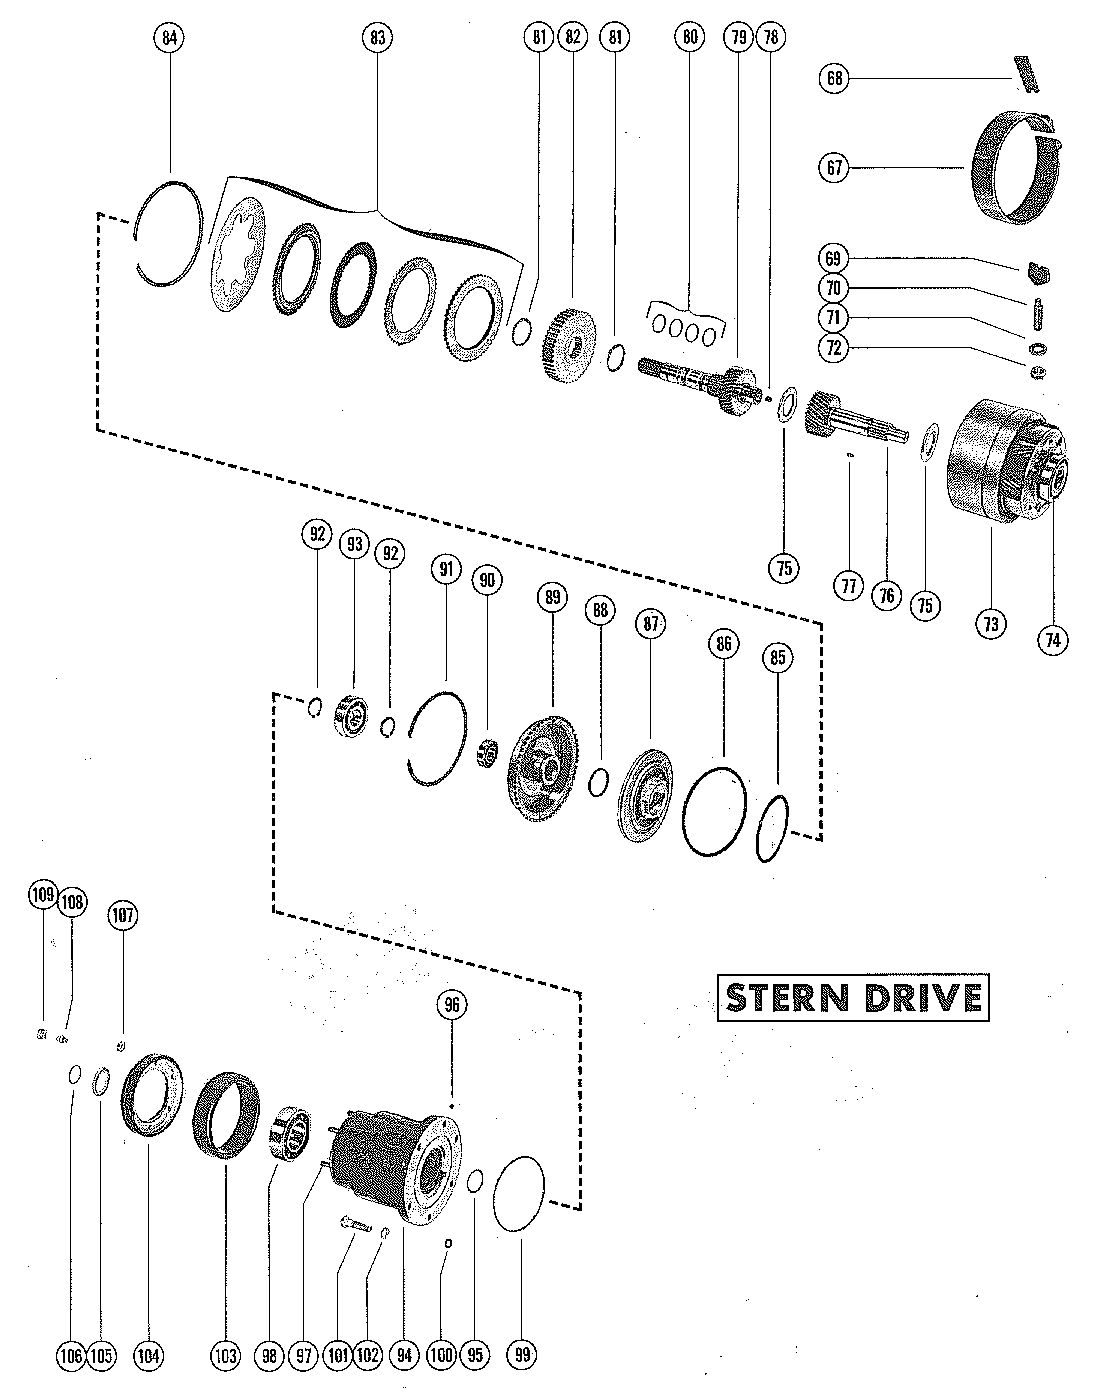 MERCRUISER 255 ENGINE TRANSMISSION ASSEMBLY (STERN DRIVE) (PAGE 2)